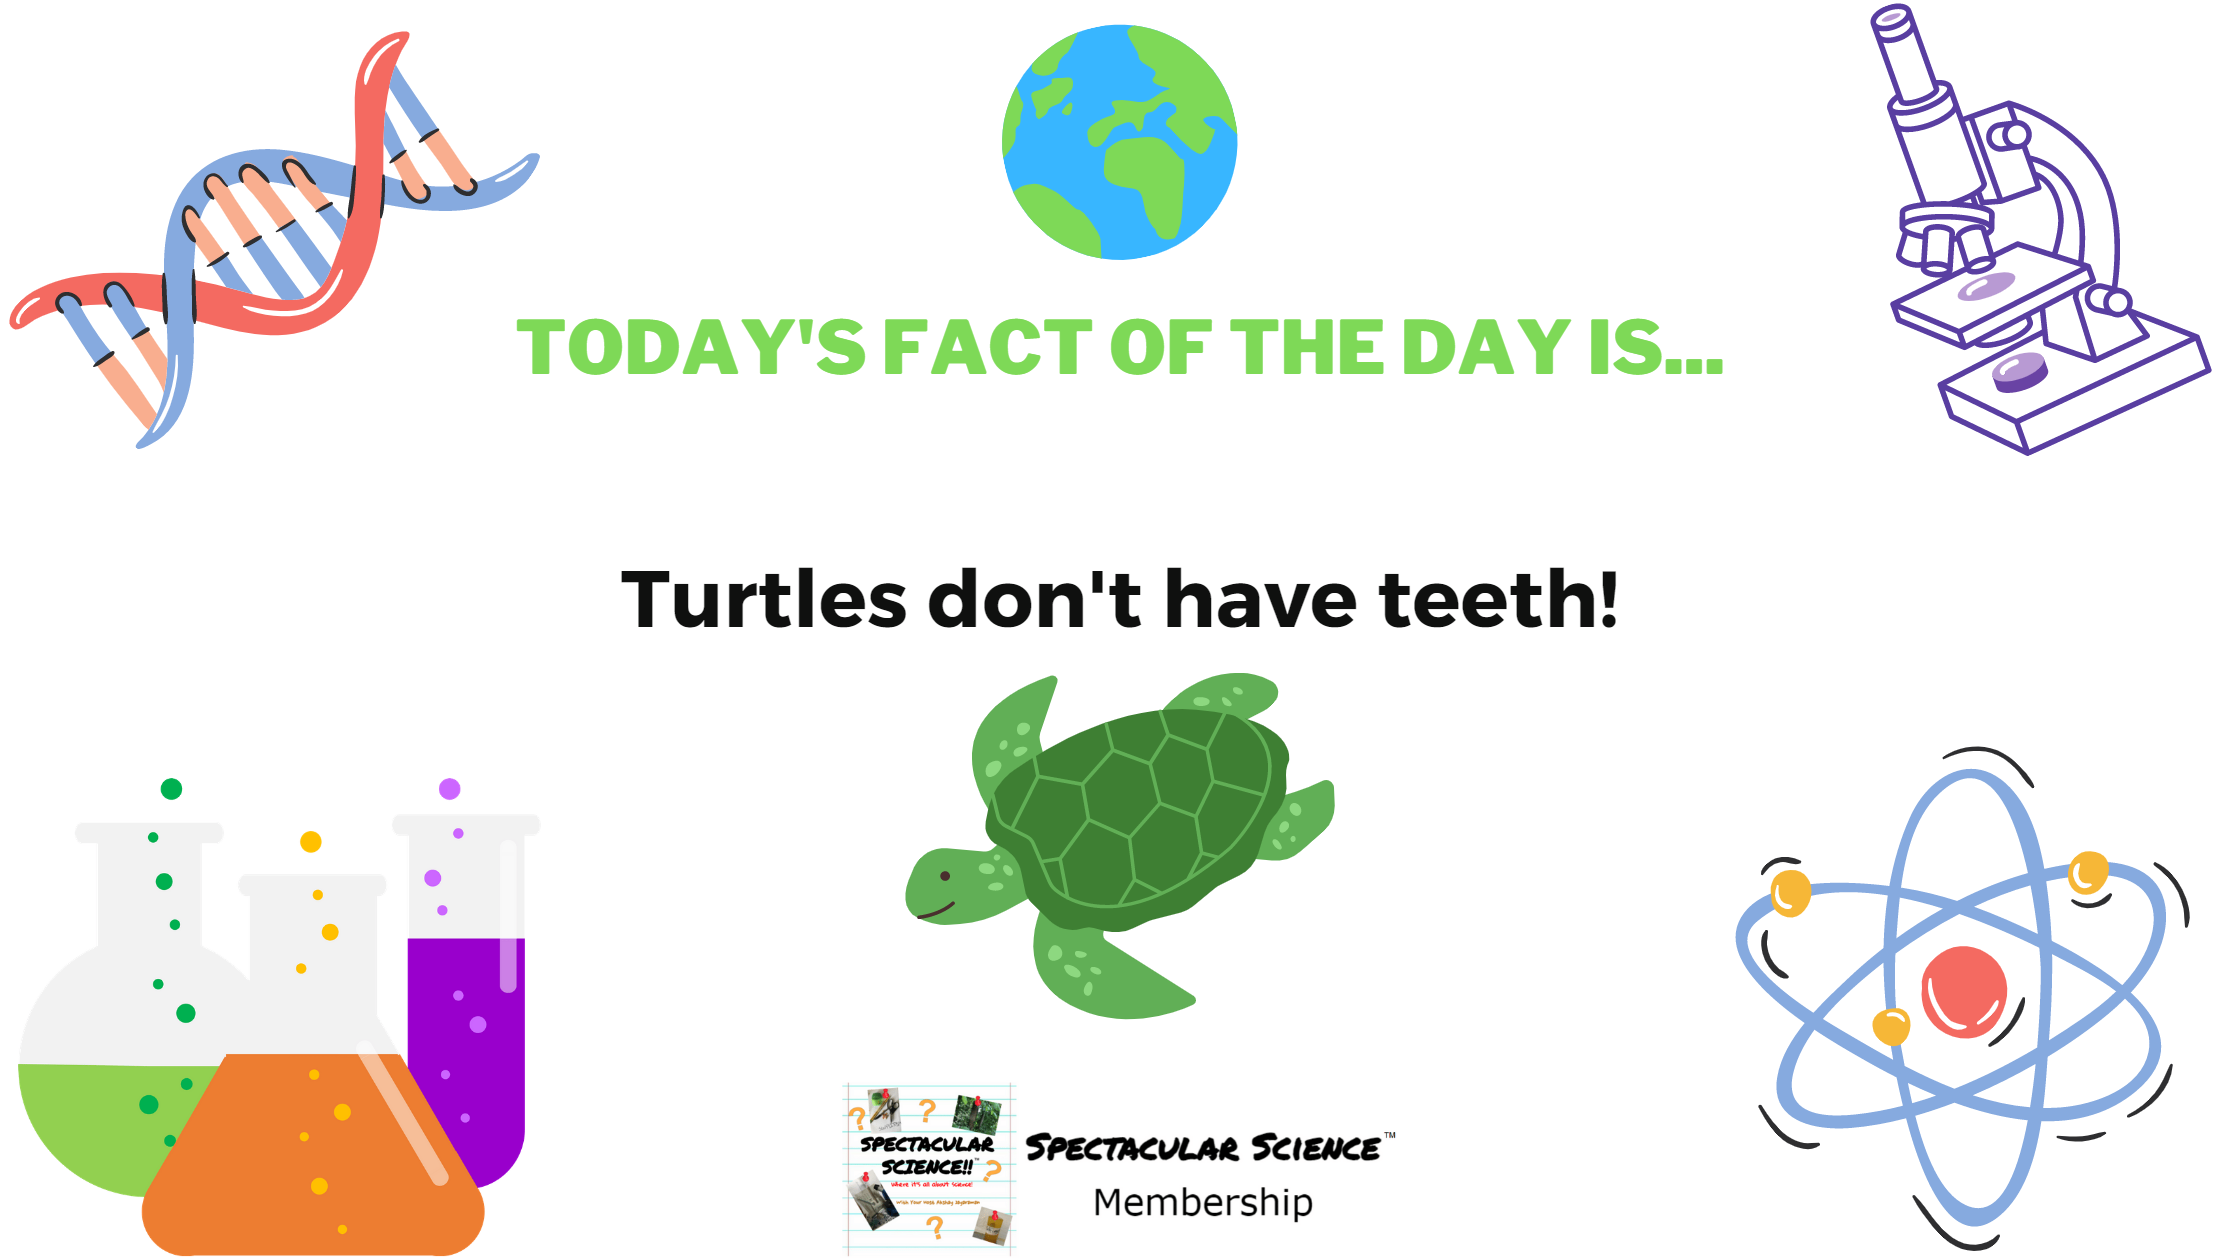 Fact of the Day Image January 21st